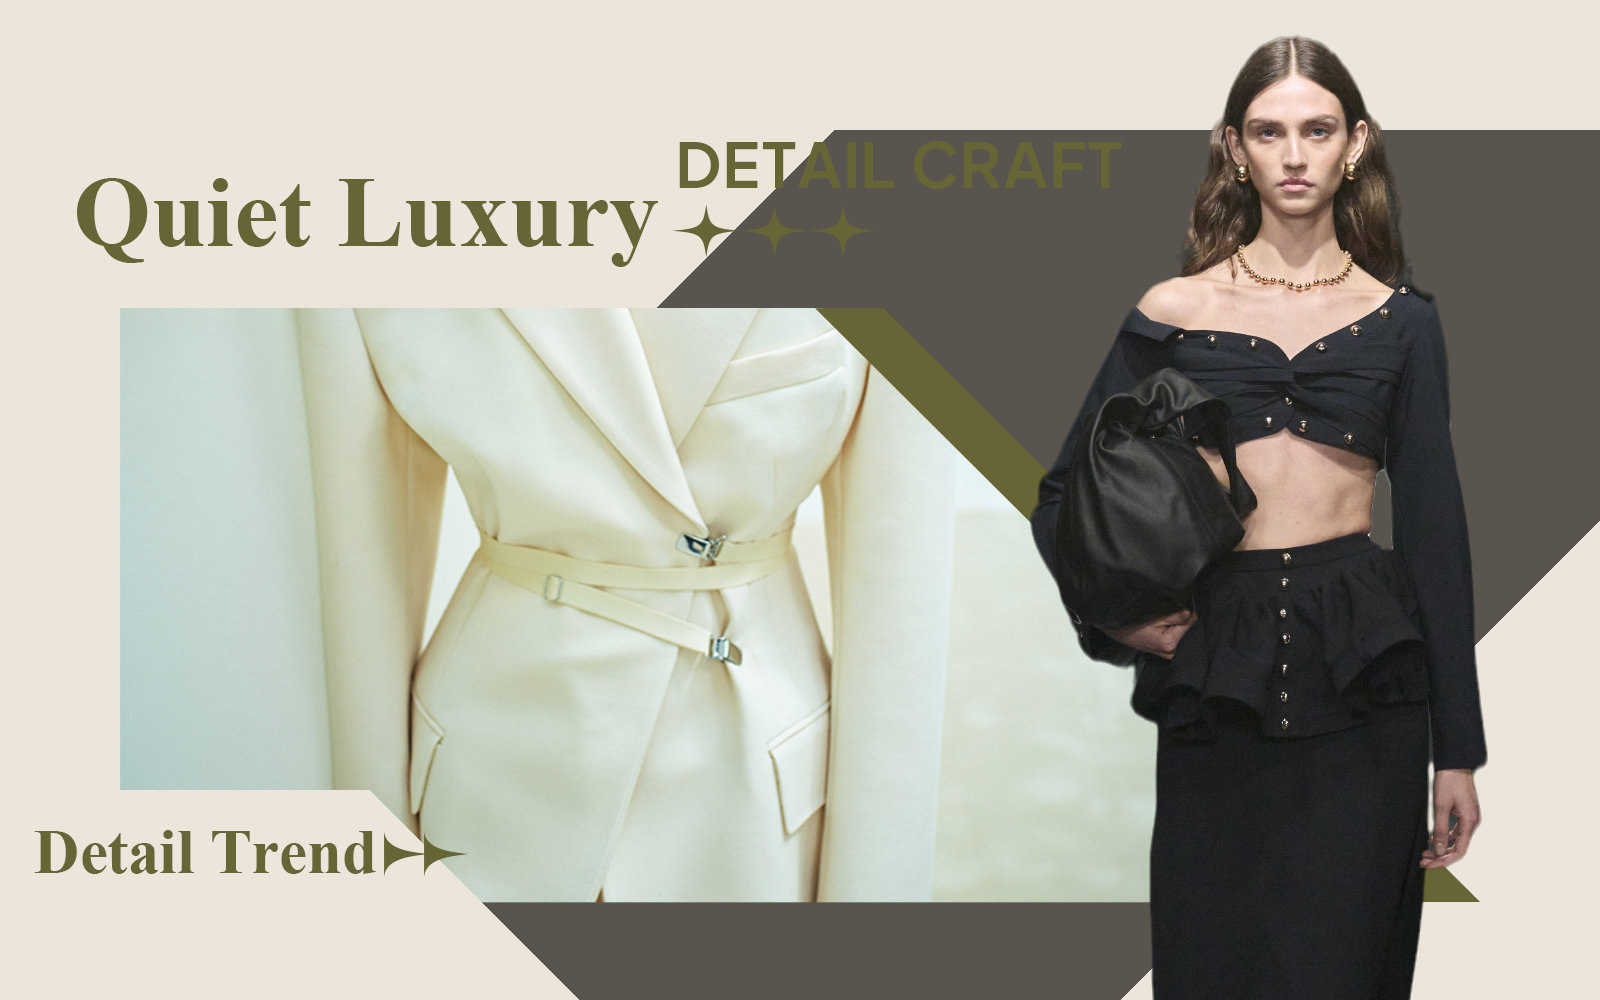 Quiet Luxury -- The Detail & Craft Trend for Womenswear